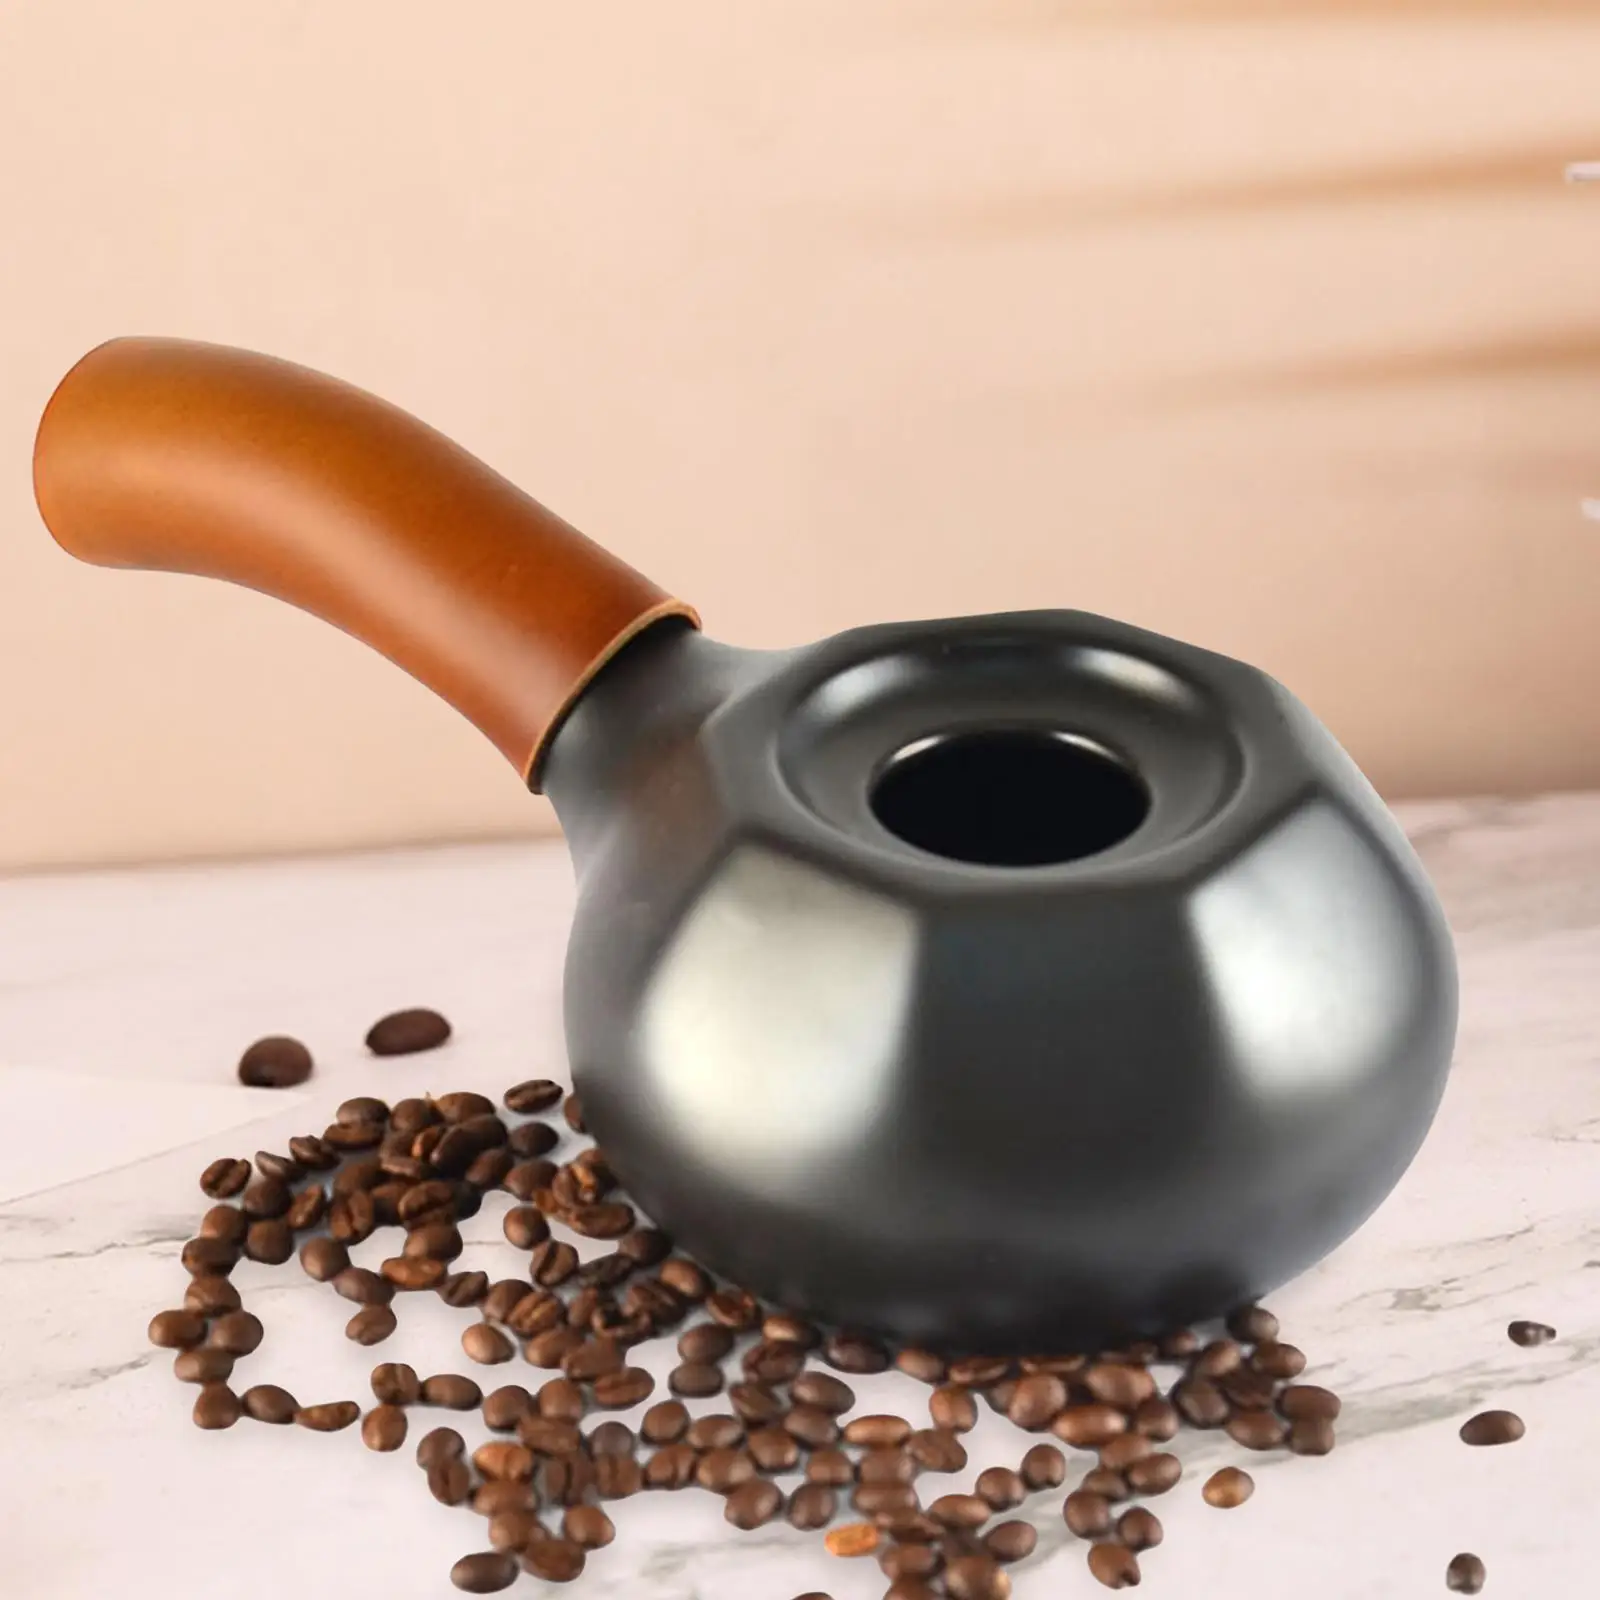 Coffee Beans Ceramic Coffee Roaster 80G~70G for Home Roasting Coffee Bean Need Fire Source Handy Coffee Bean Roaster for DIY